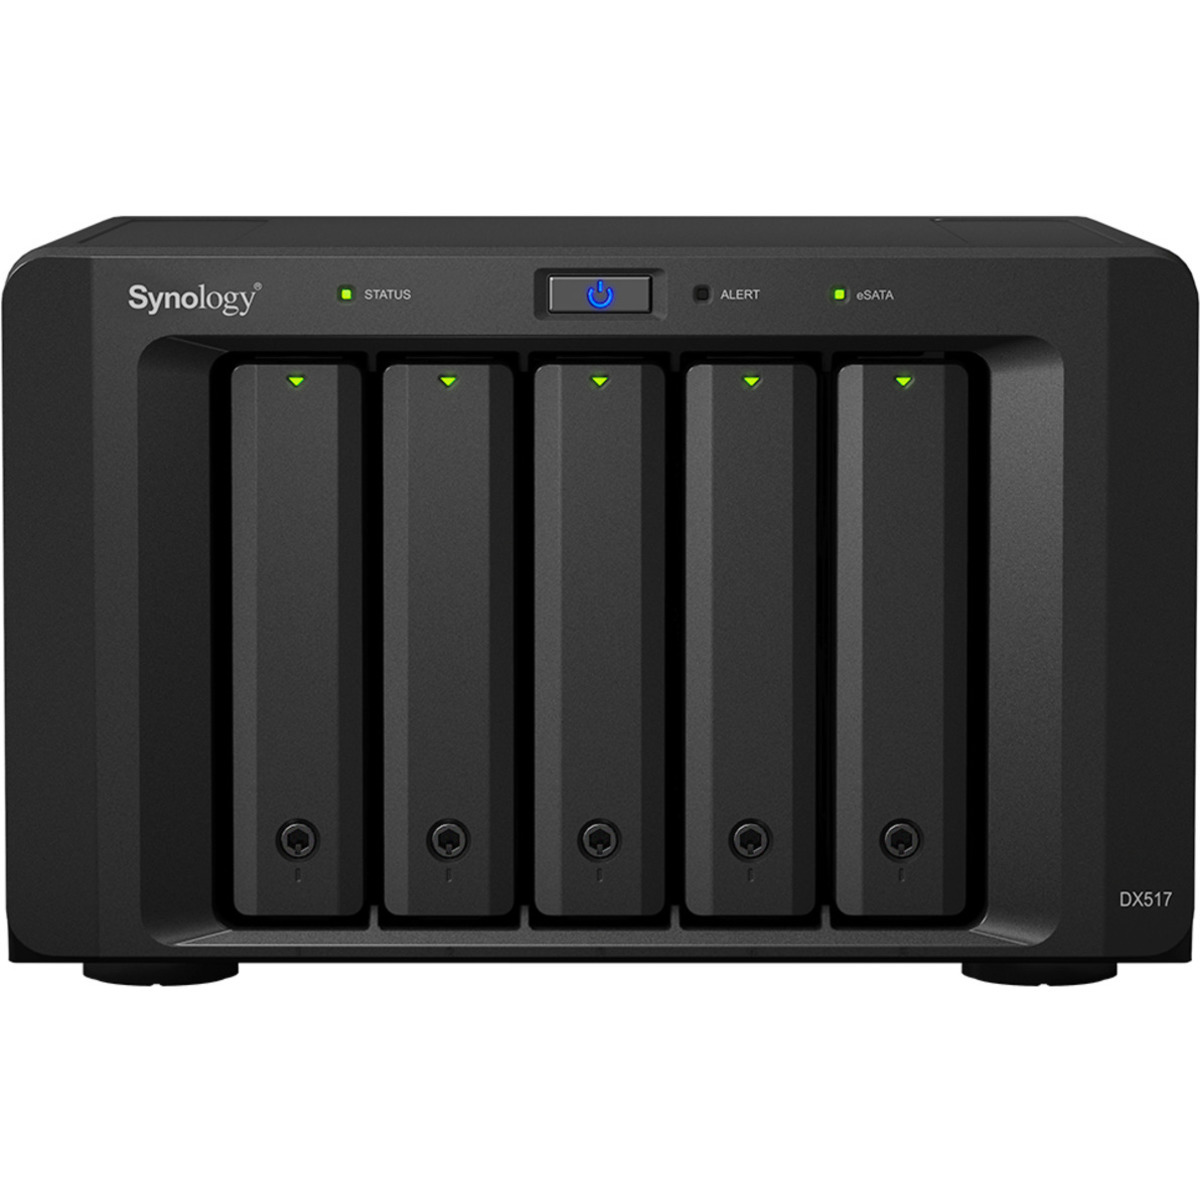 Synology DX517 External Expansion Drive 32tb 5-Bay Desktop Multimedia / Power User / Business Expansion Enclosure 4x8tb Seagate BarraCuda ST8000DM004 3.5 5400rpm SATA 6Gb/s HDD CONSUMER Class Drives Installed - Burn-In Tested DX517 External Expansion Drive